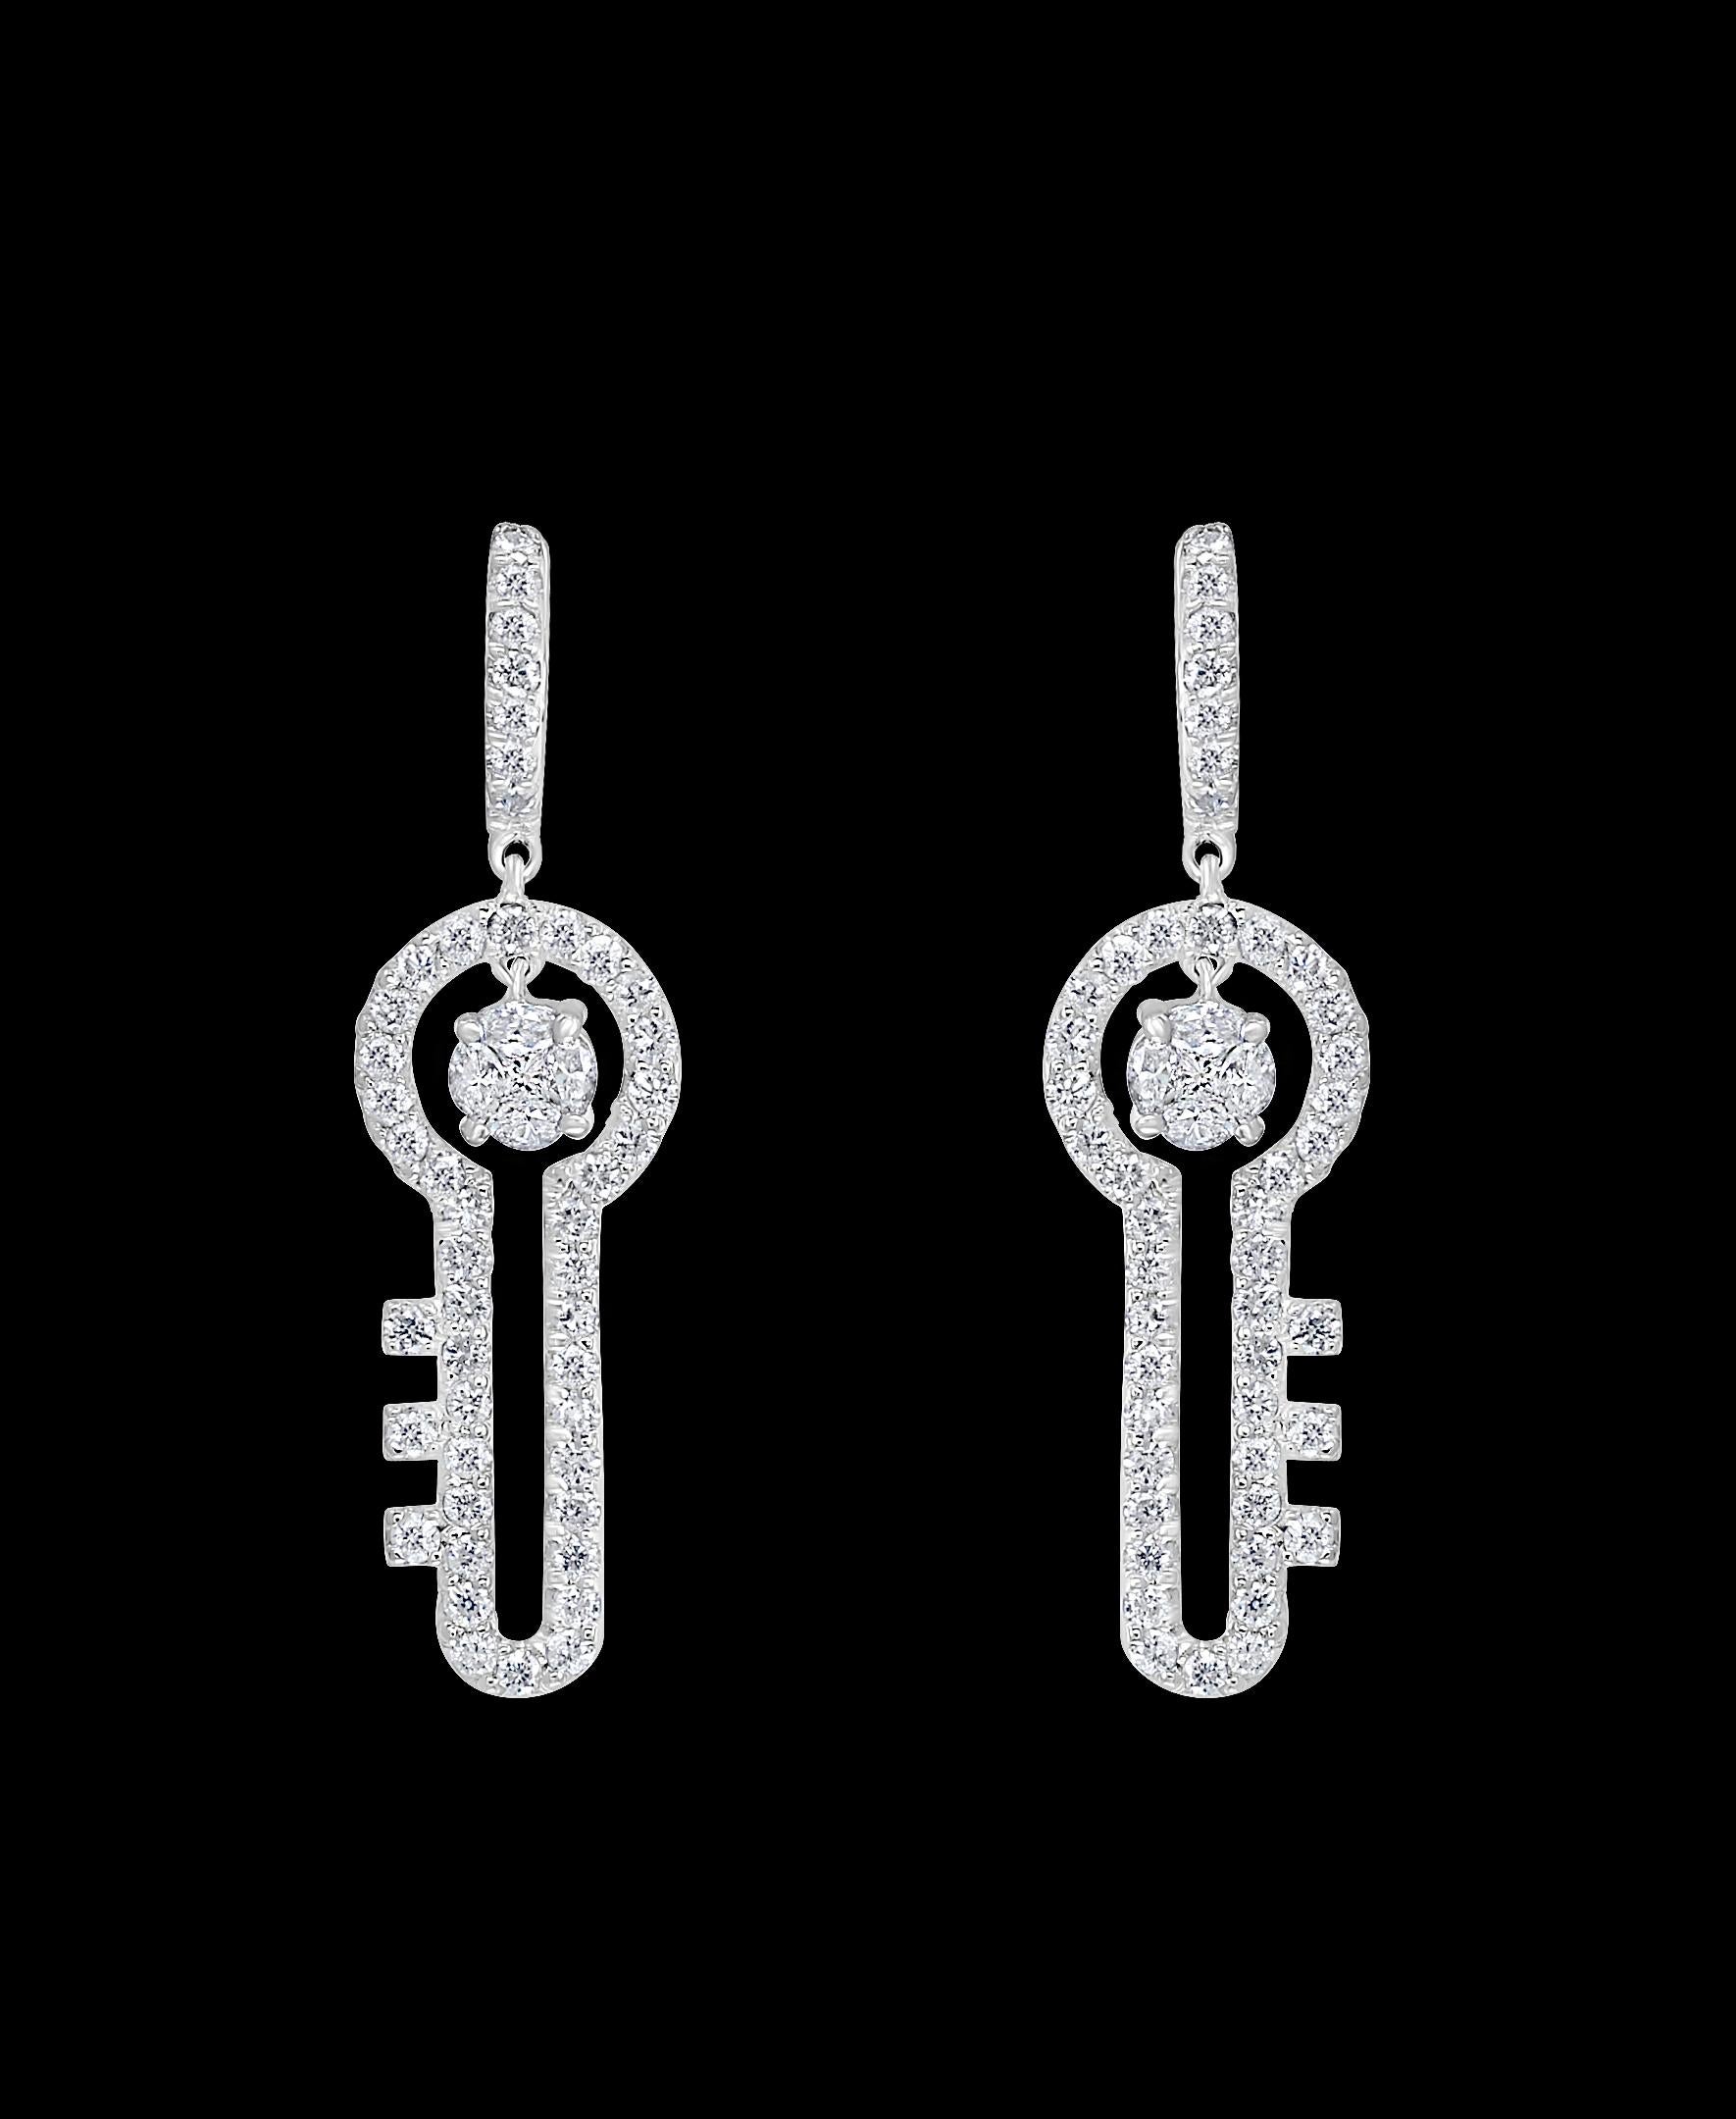 3.2 Ct Diamond Drop Cocktail  Key Shape Earrings in 14 Karat White Gold 8 Grams
A fabulous pair of earrings with an enormous amount of look and sparkle!
These exquisite pair of earrings features several  brilliant cut round diamond in each earring .